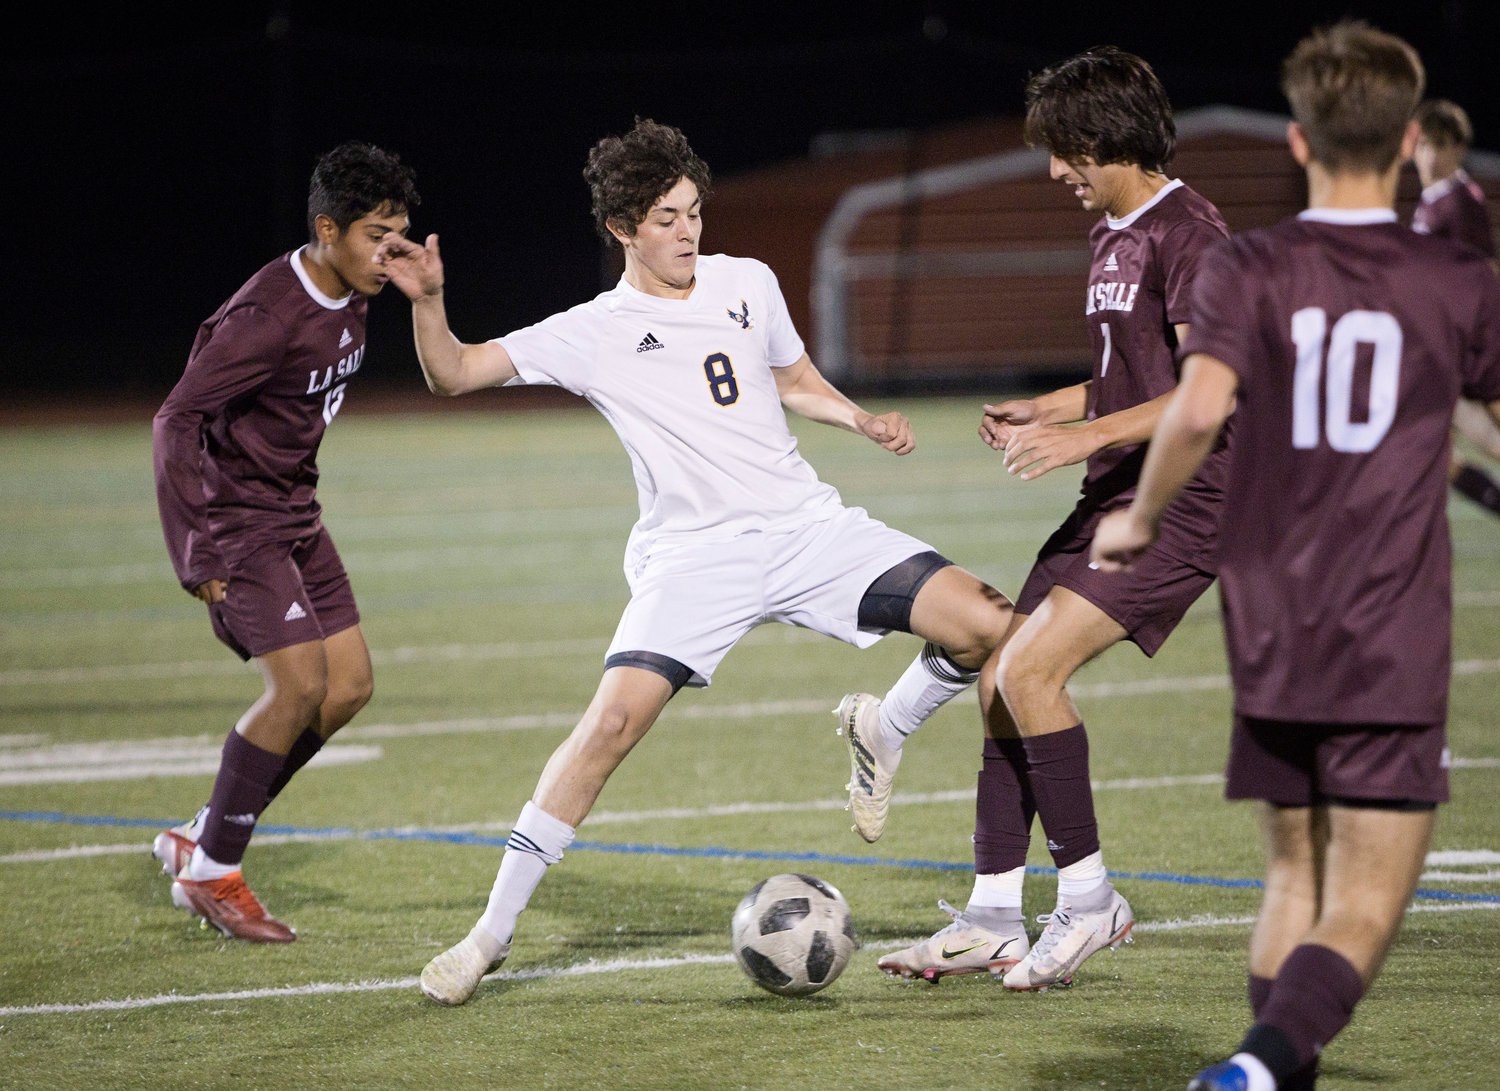 Barrington's Ryan Perugini is pressured by a trio of LaSalle opponents while taking possession of the ball.